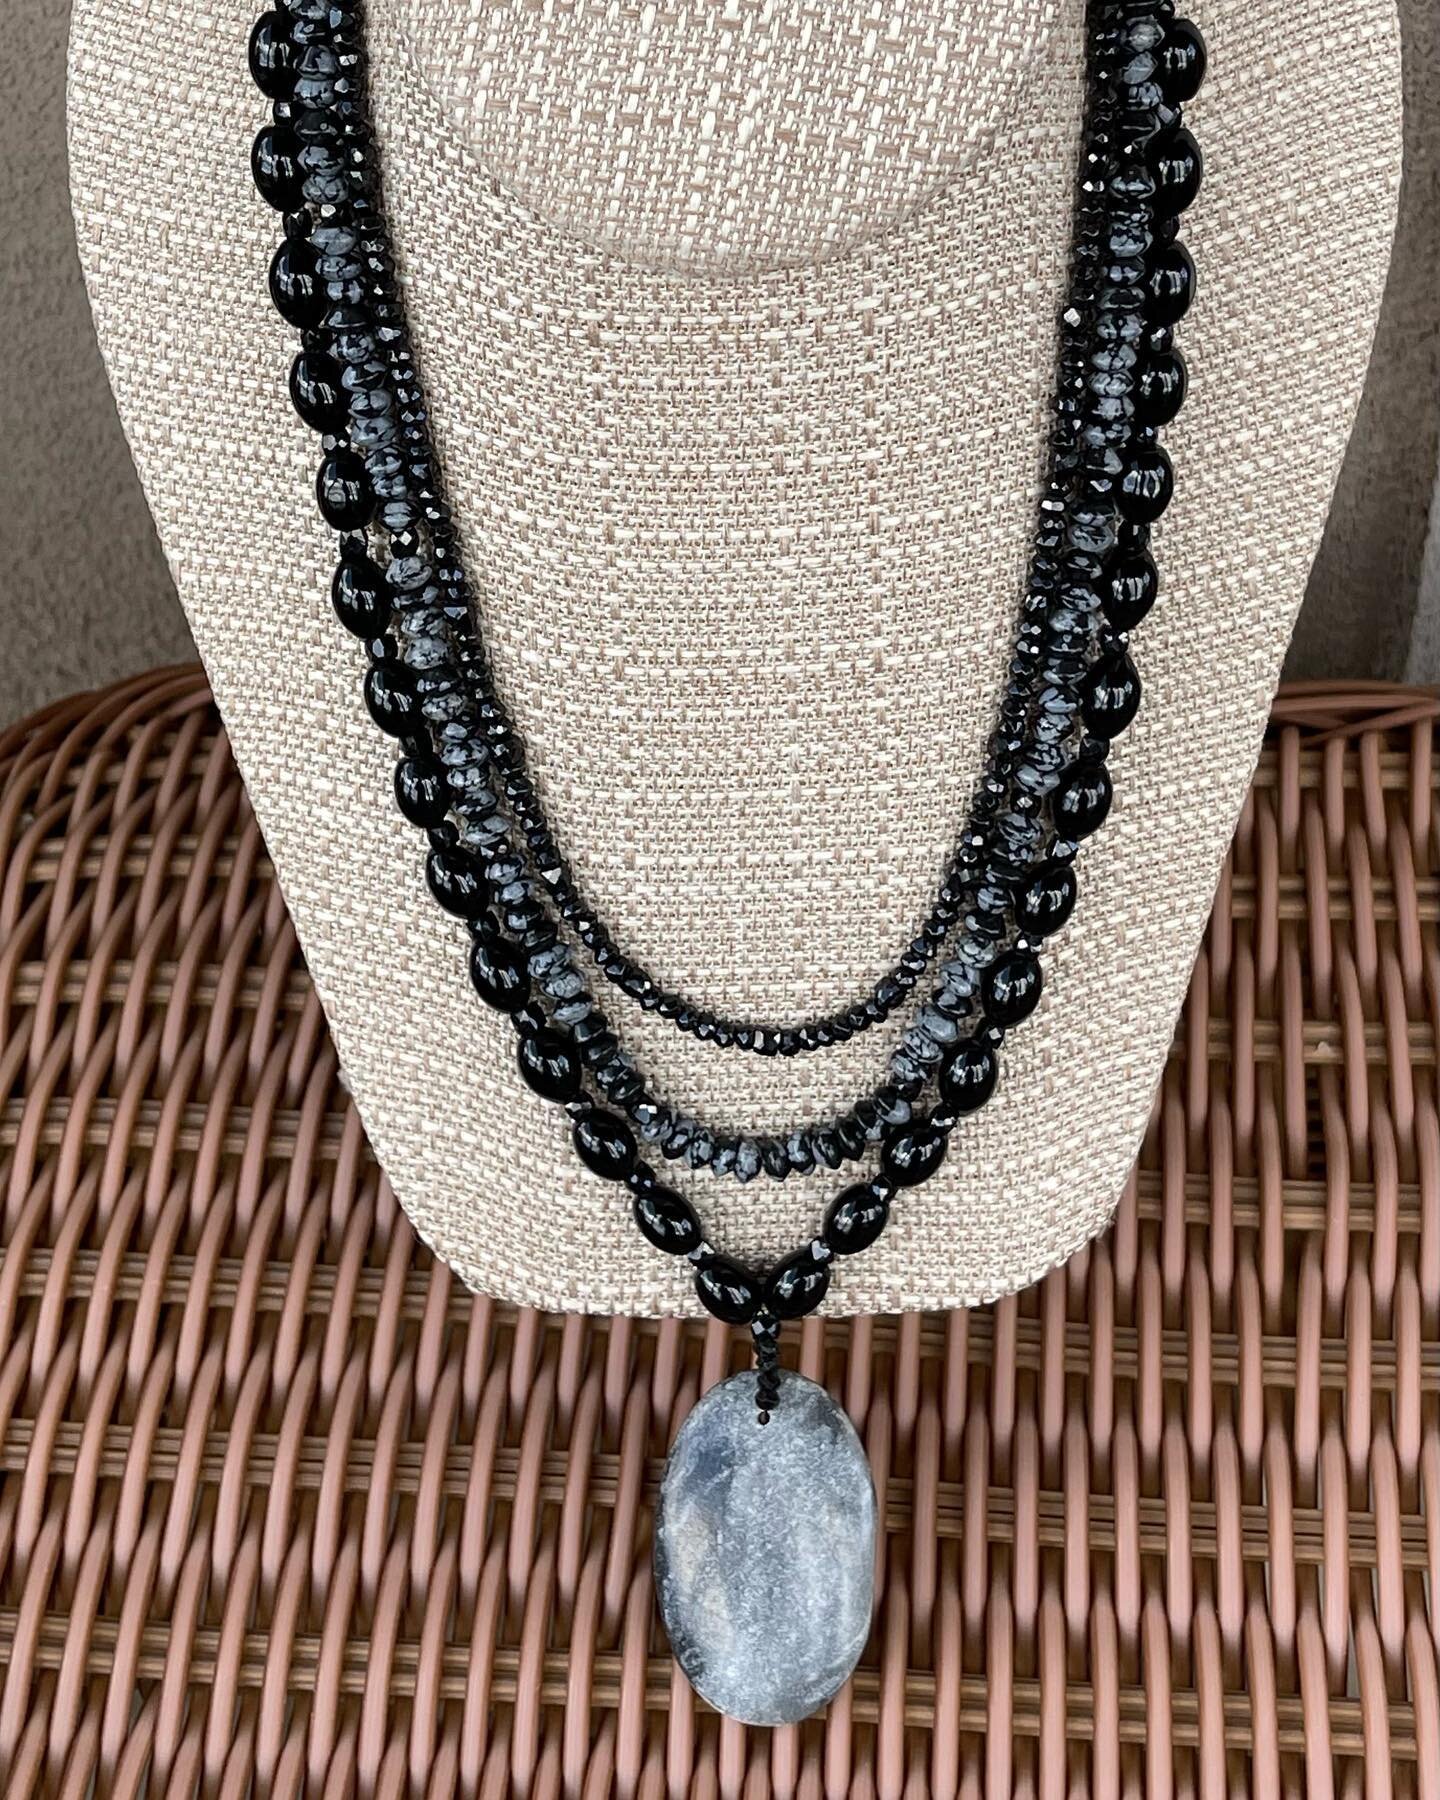 This 3 strand beauty is aptly titled &ldquo;Night Sky&rdquo;. #nightsky  I used faceted Black Spinel in several sizes and ovals too.  Snowflake Obsidian discs are the center strand and the drop is Picasso Marble. It&rsquo;s completed with Delica Glas